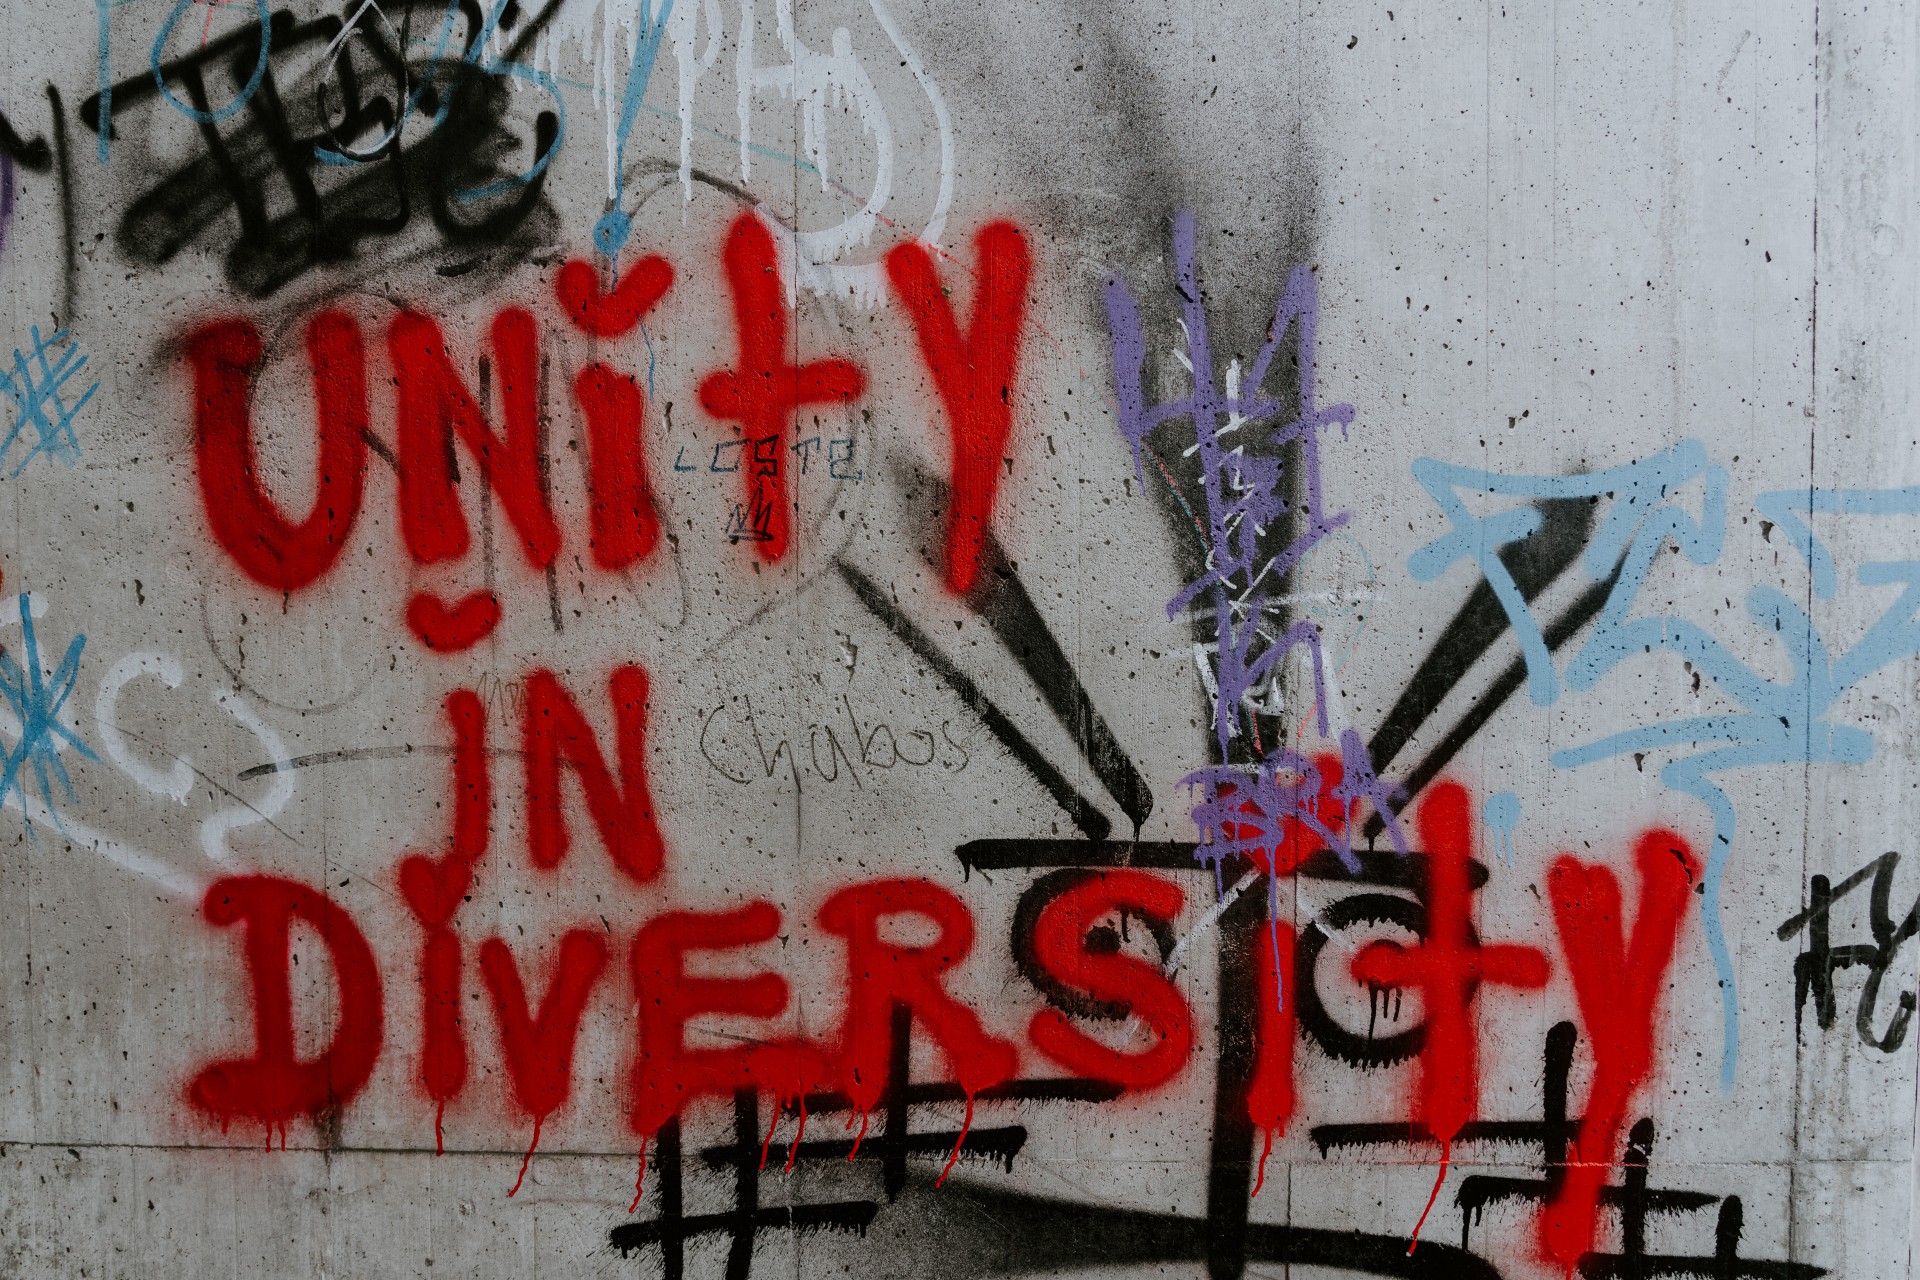 Diversity, Equity, and Inclusion – One Persons Opinion